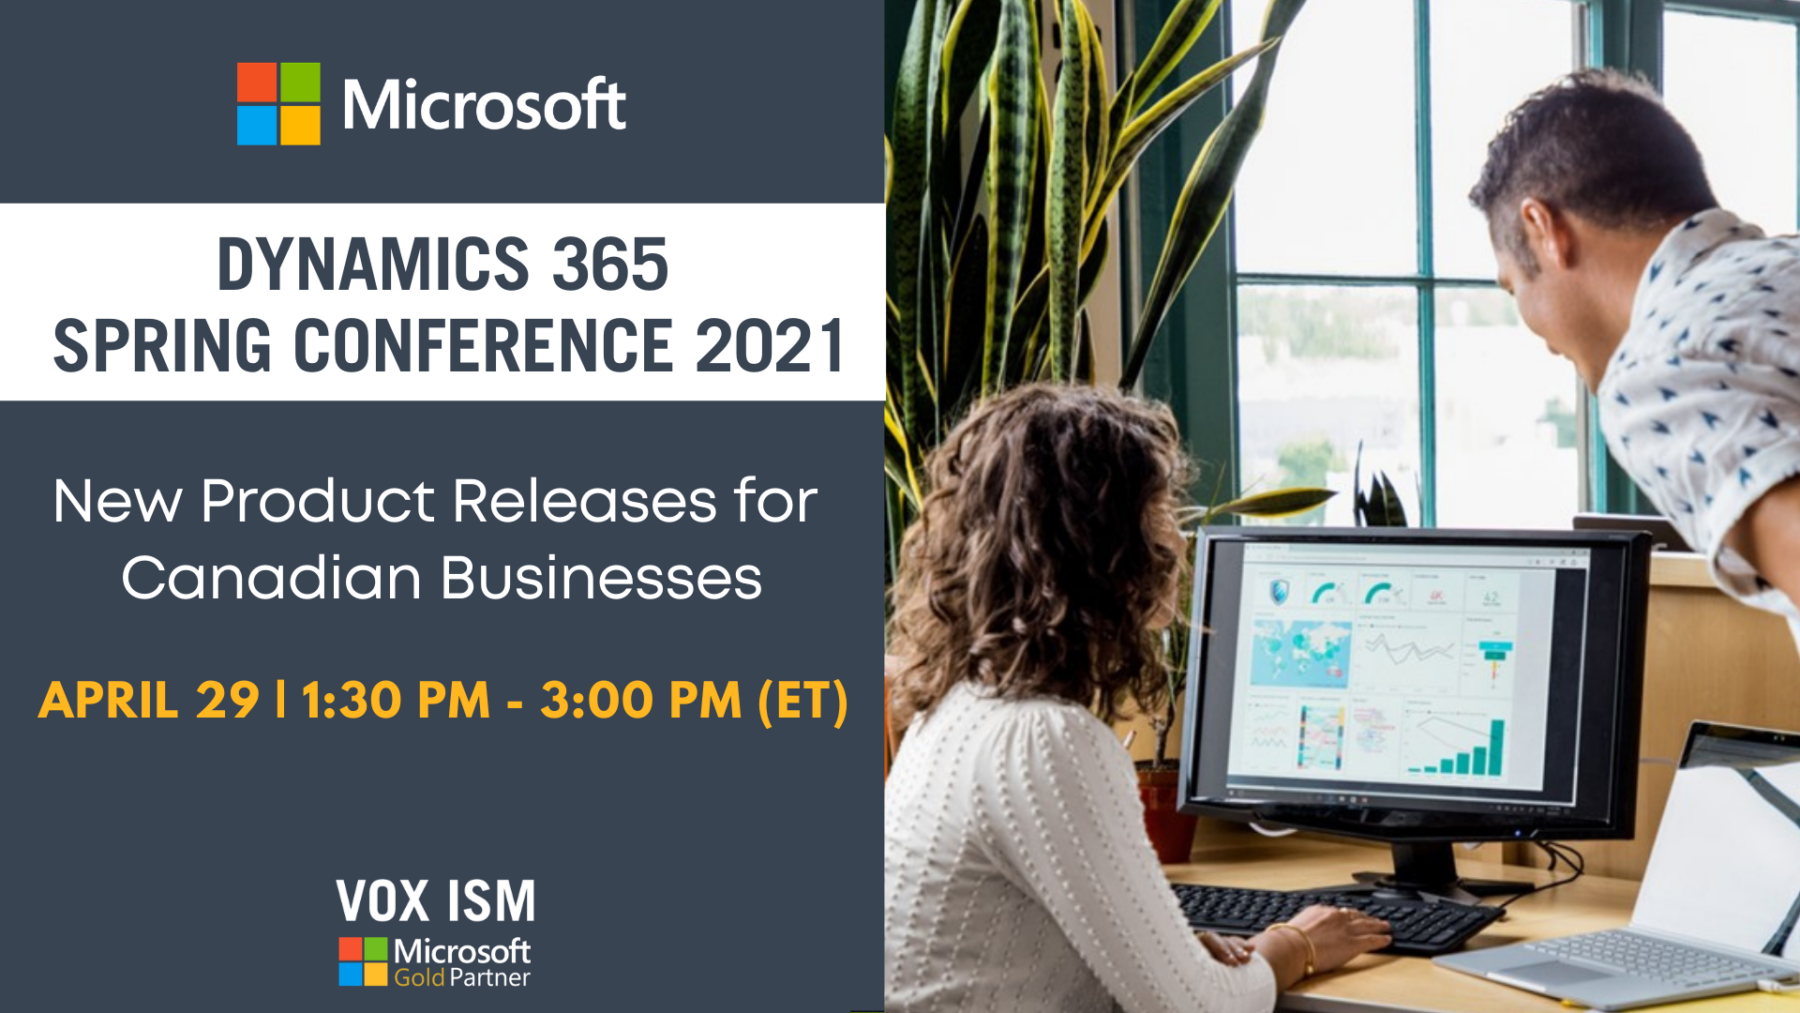 Microsoft Dynamics 365 Spring Conference - New Product Releases for Canadian Businesses - April 29